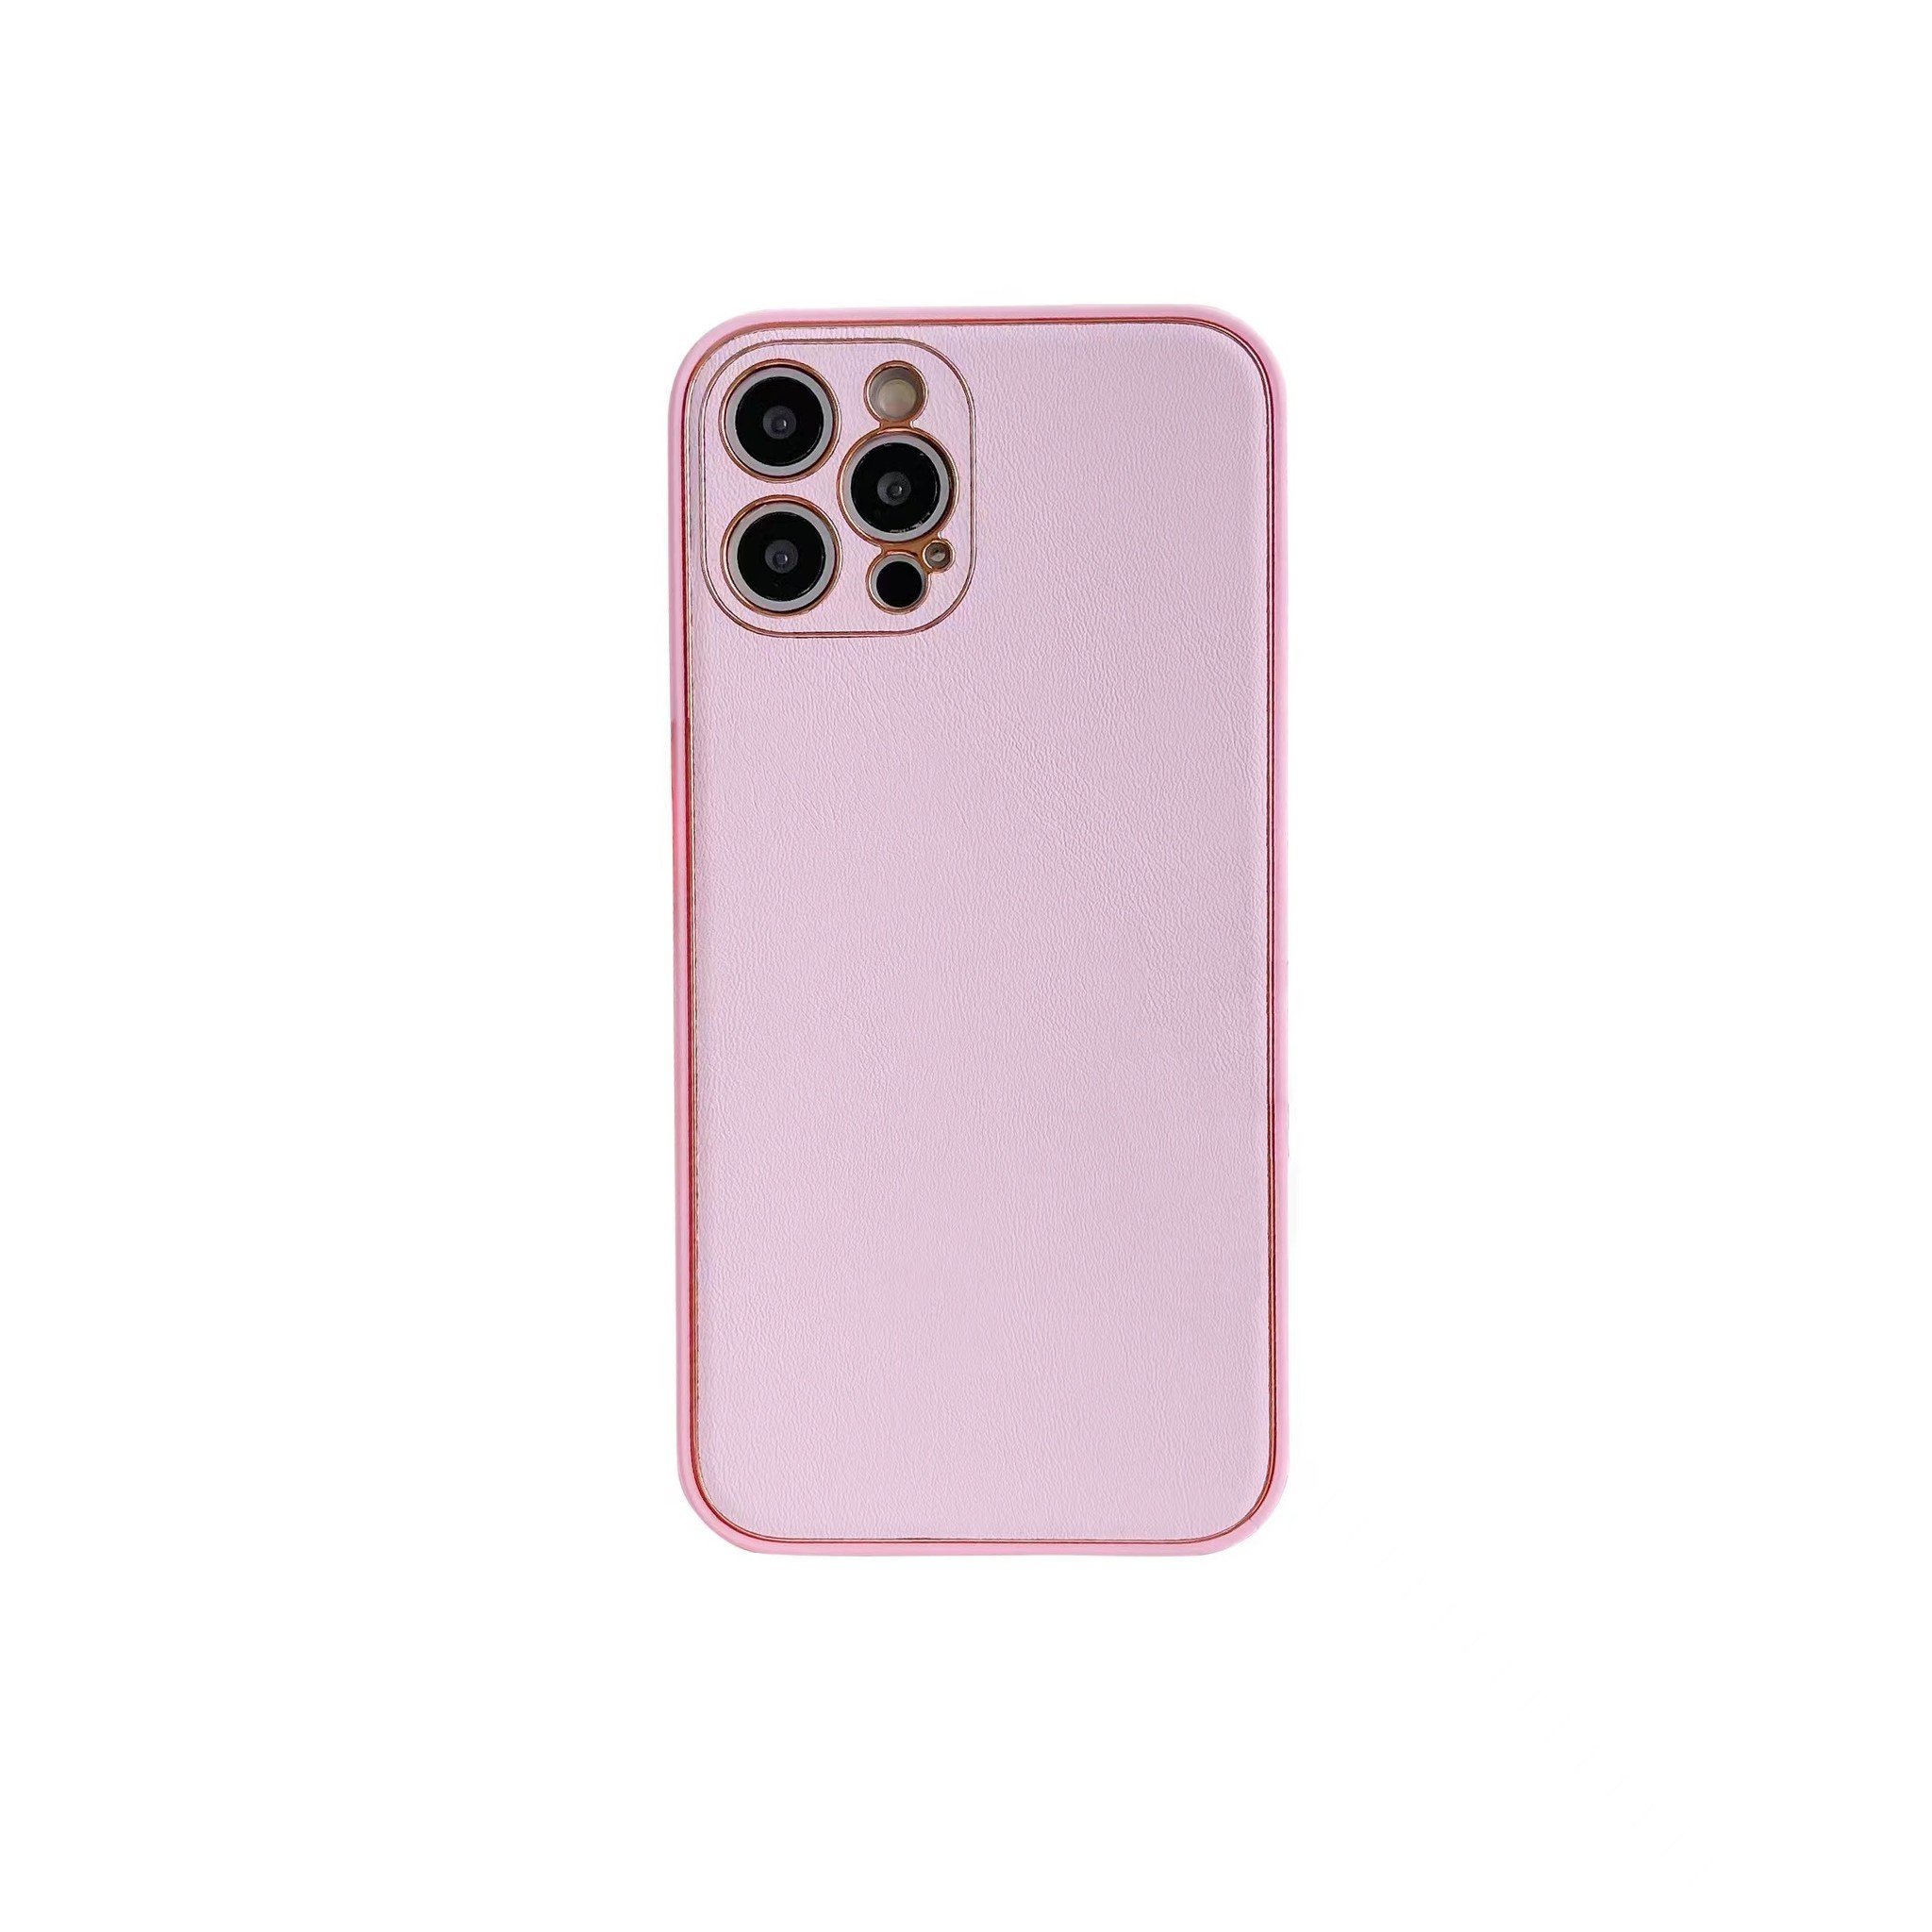 iPhone 12 Pro Back Cover Hoesje - leer - Luxe - Backcover - Apple iPhone 12 Pro - Roze/Goud